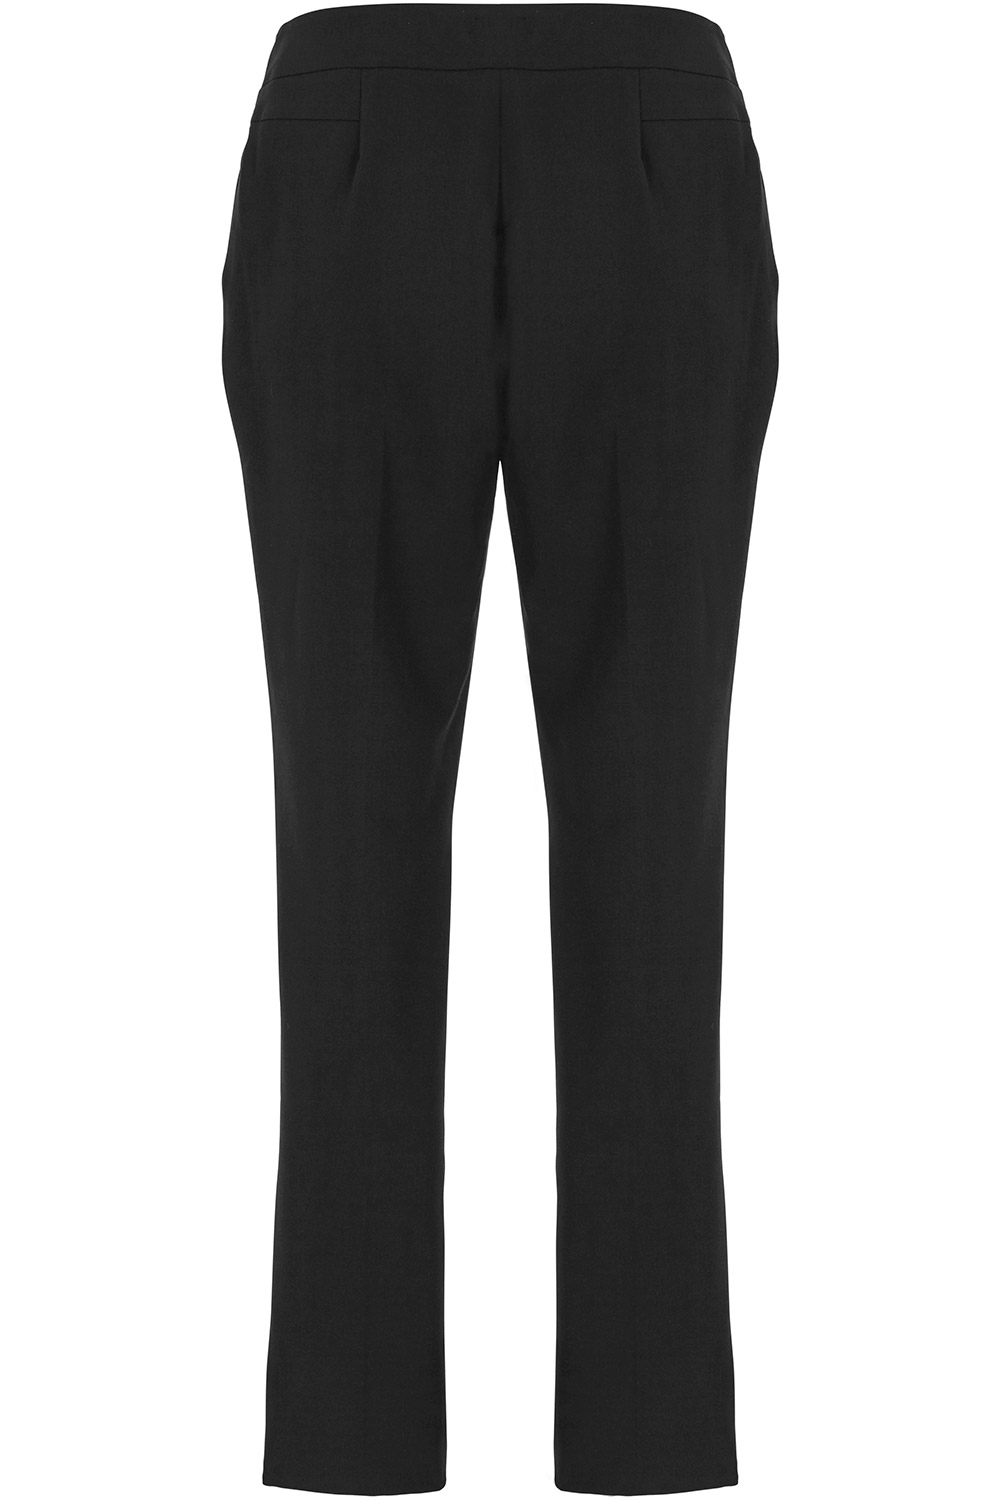 Buy Tailored Tapered Trousers | Home Delivery | Bonmarché